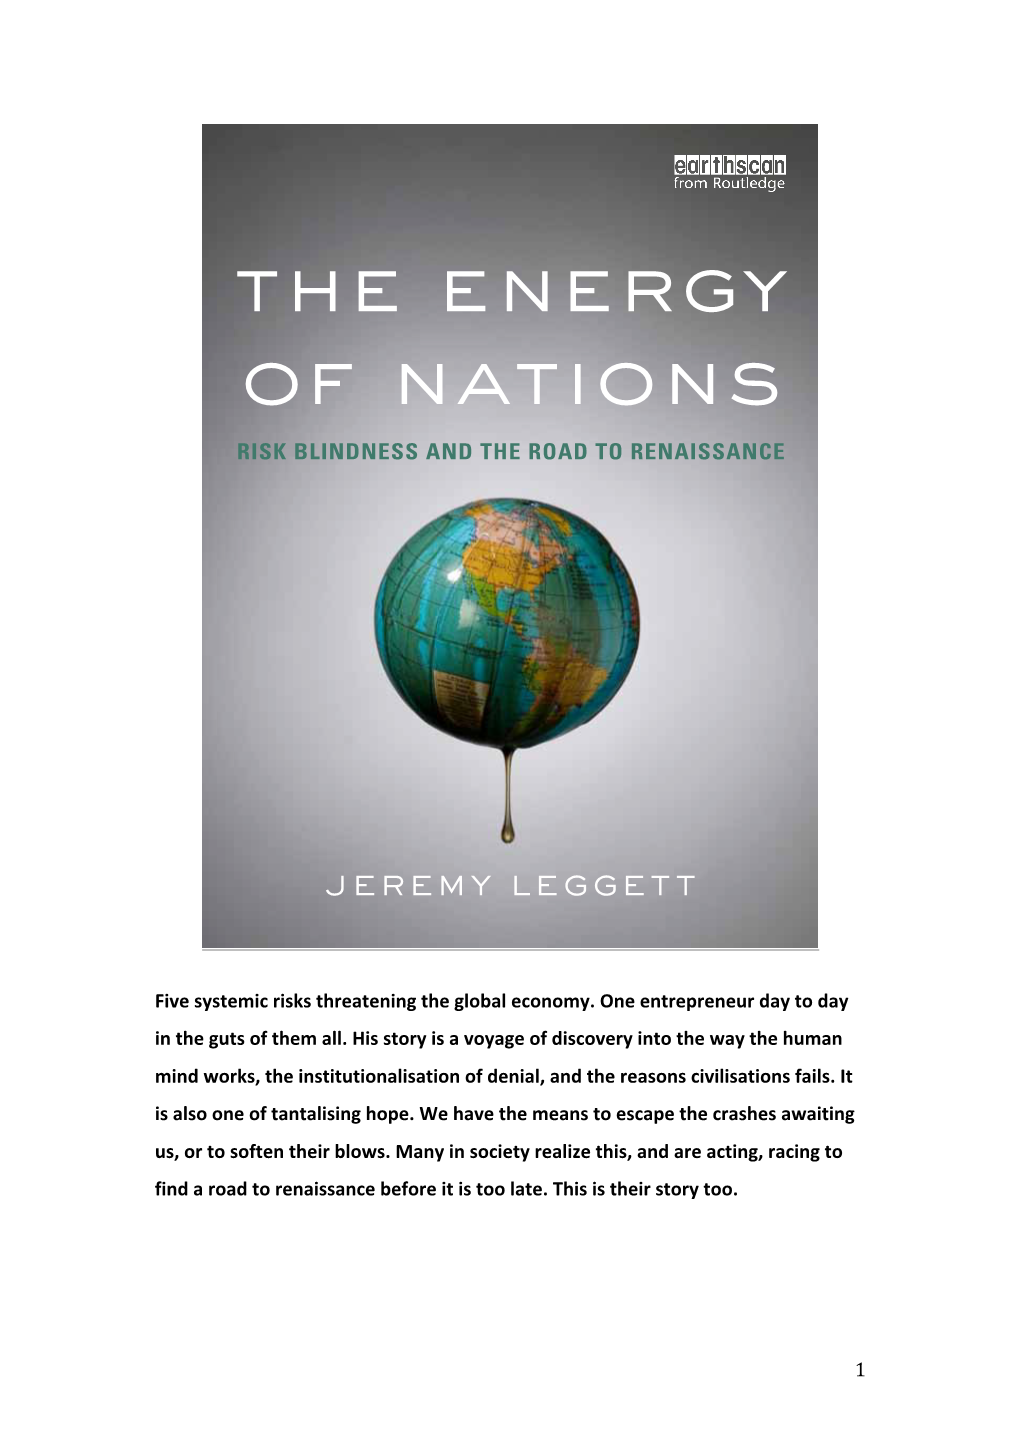 The Energy of Nations RISK BLINDNESS and the ROAD to RENAISSANCE